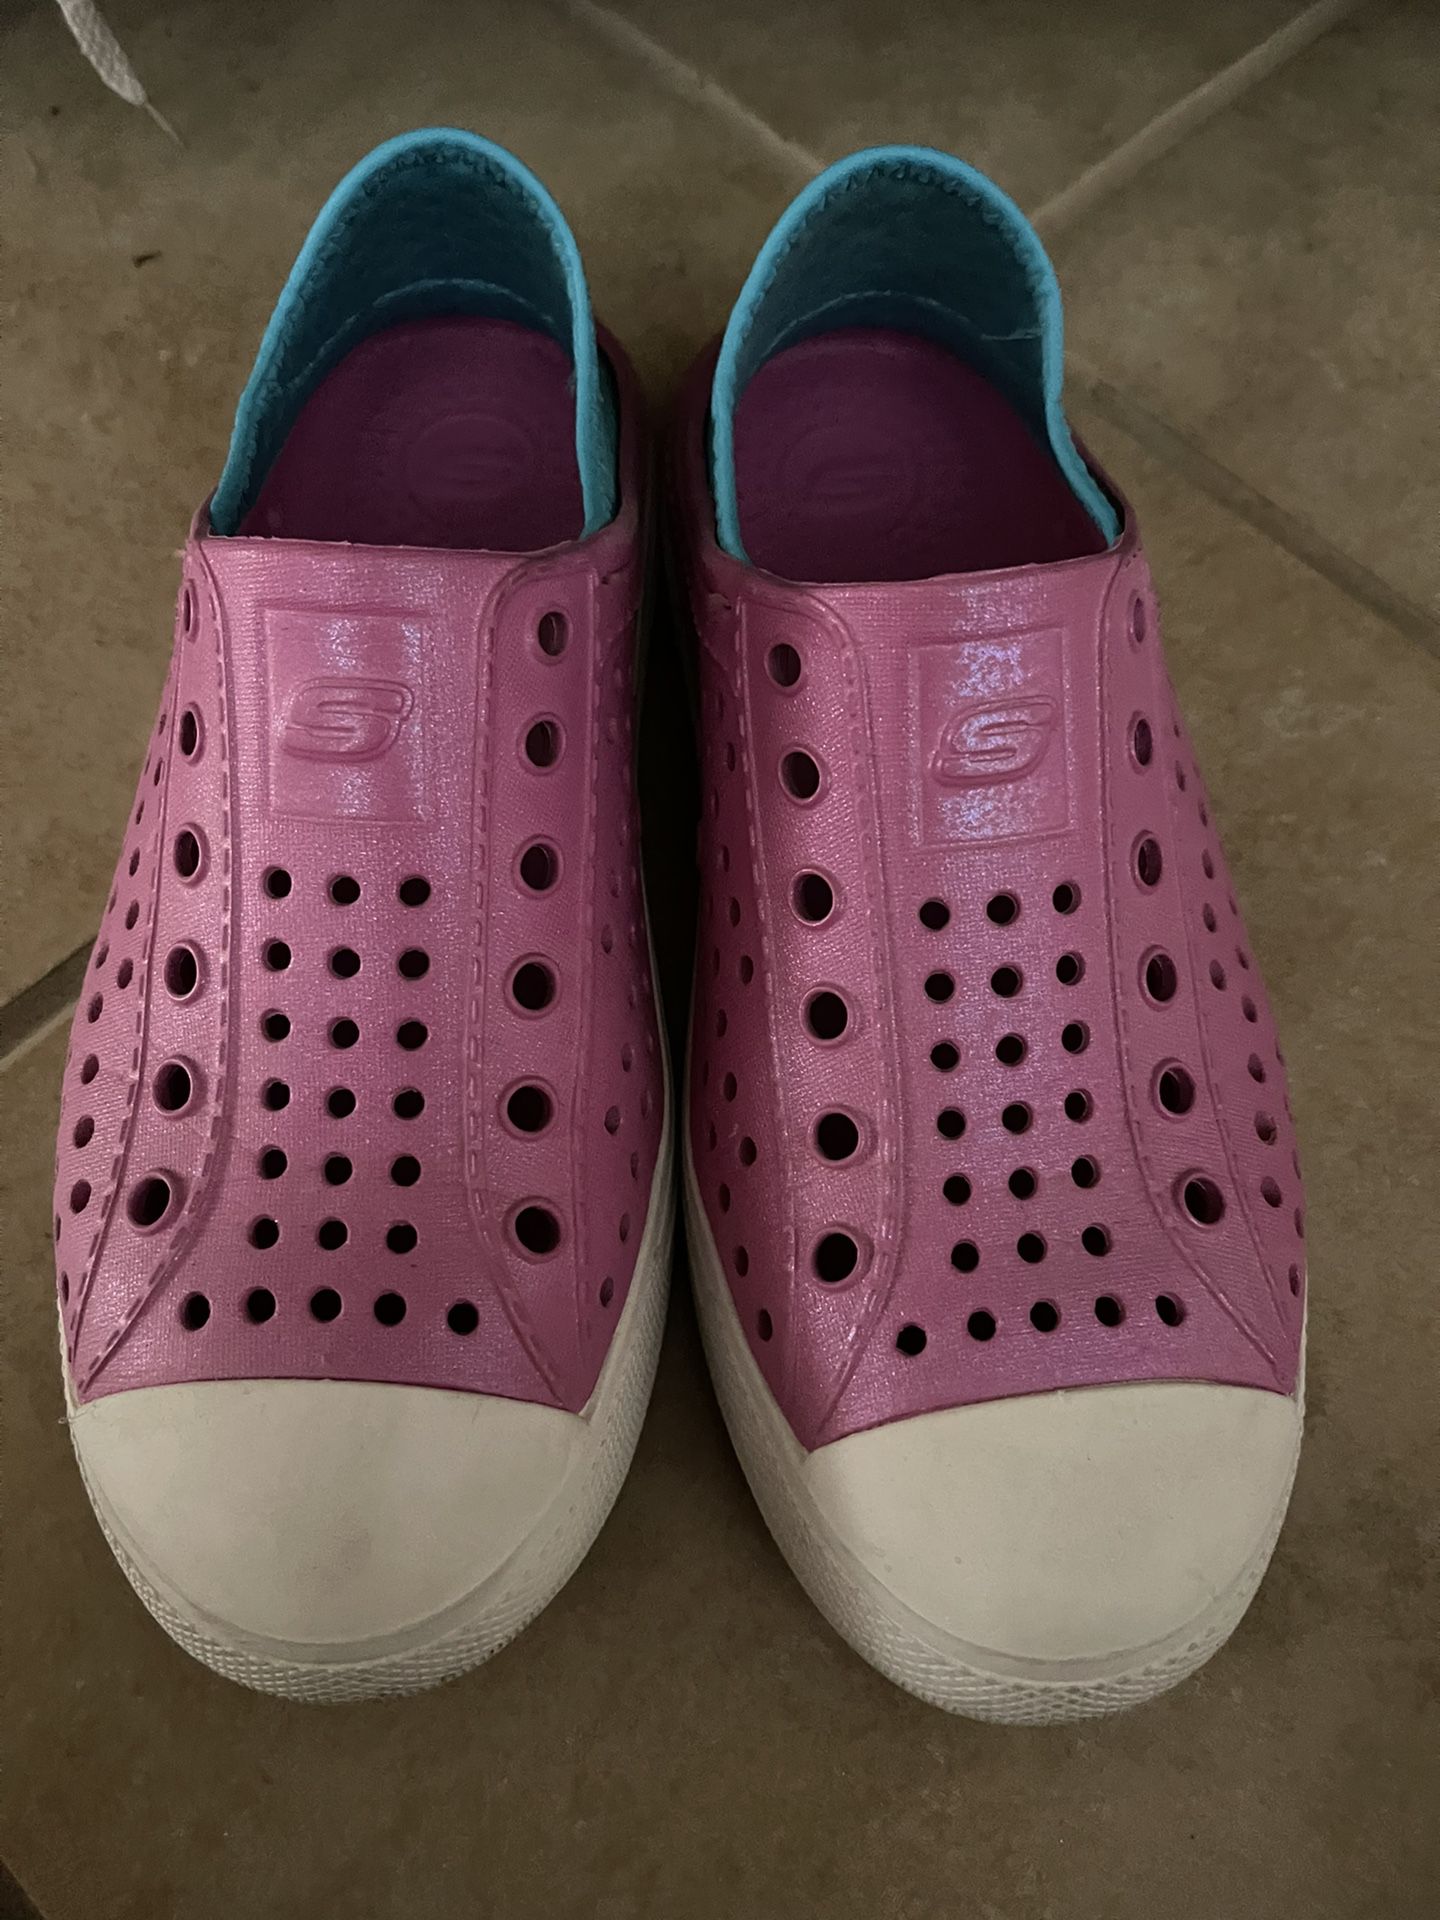 Girls Size 2 Skechers Shoes - Great Condition 